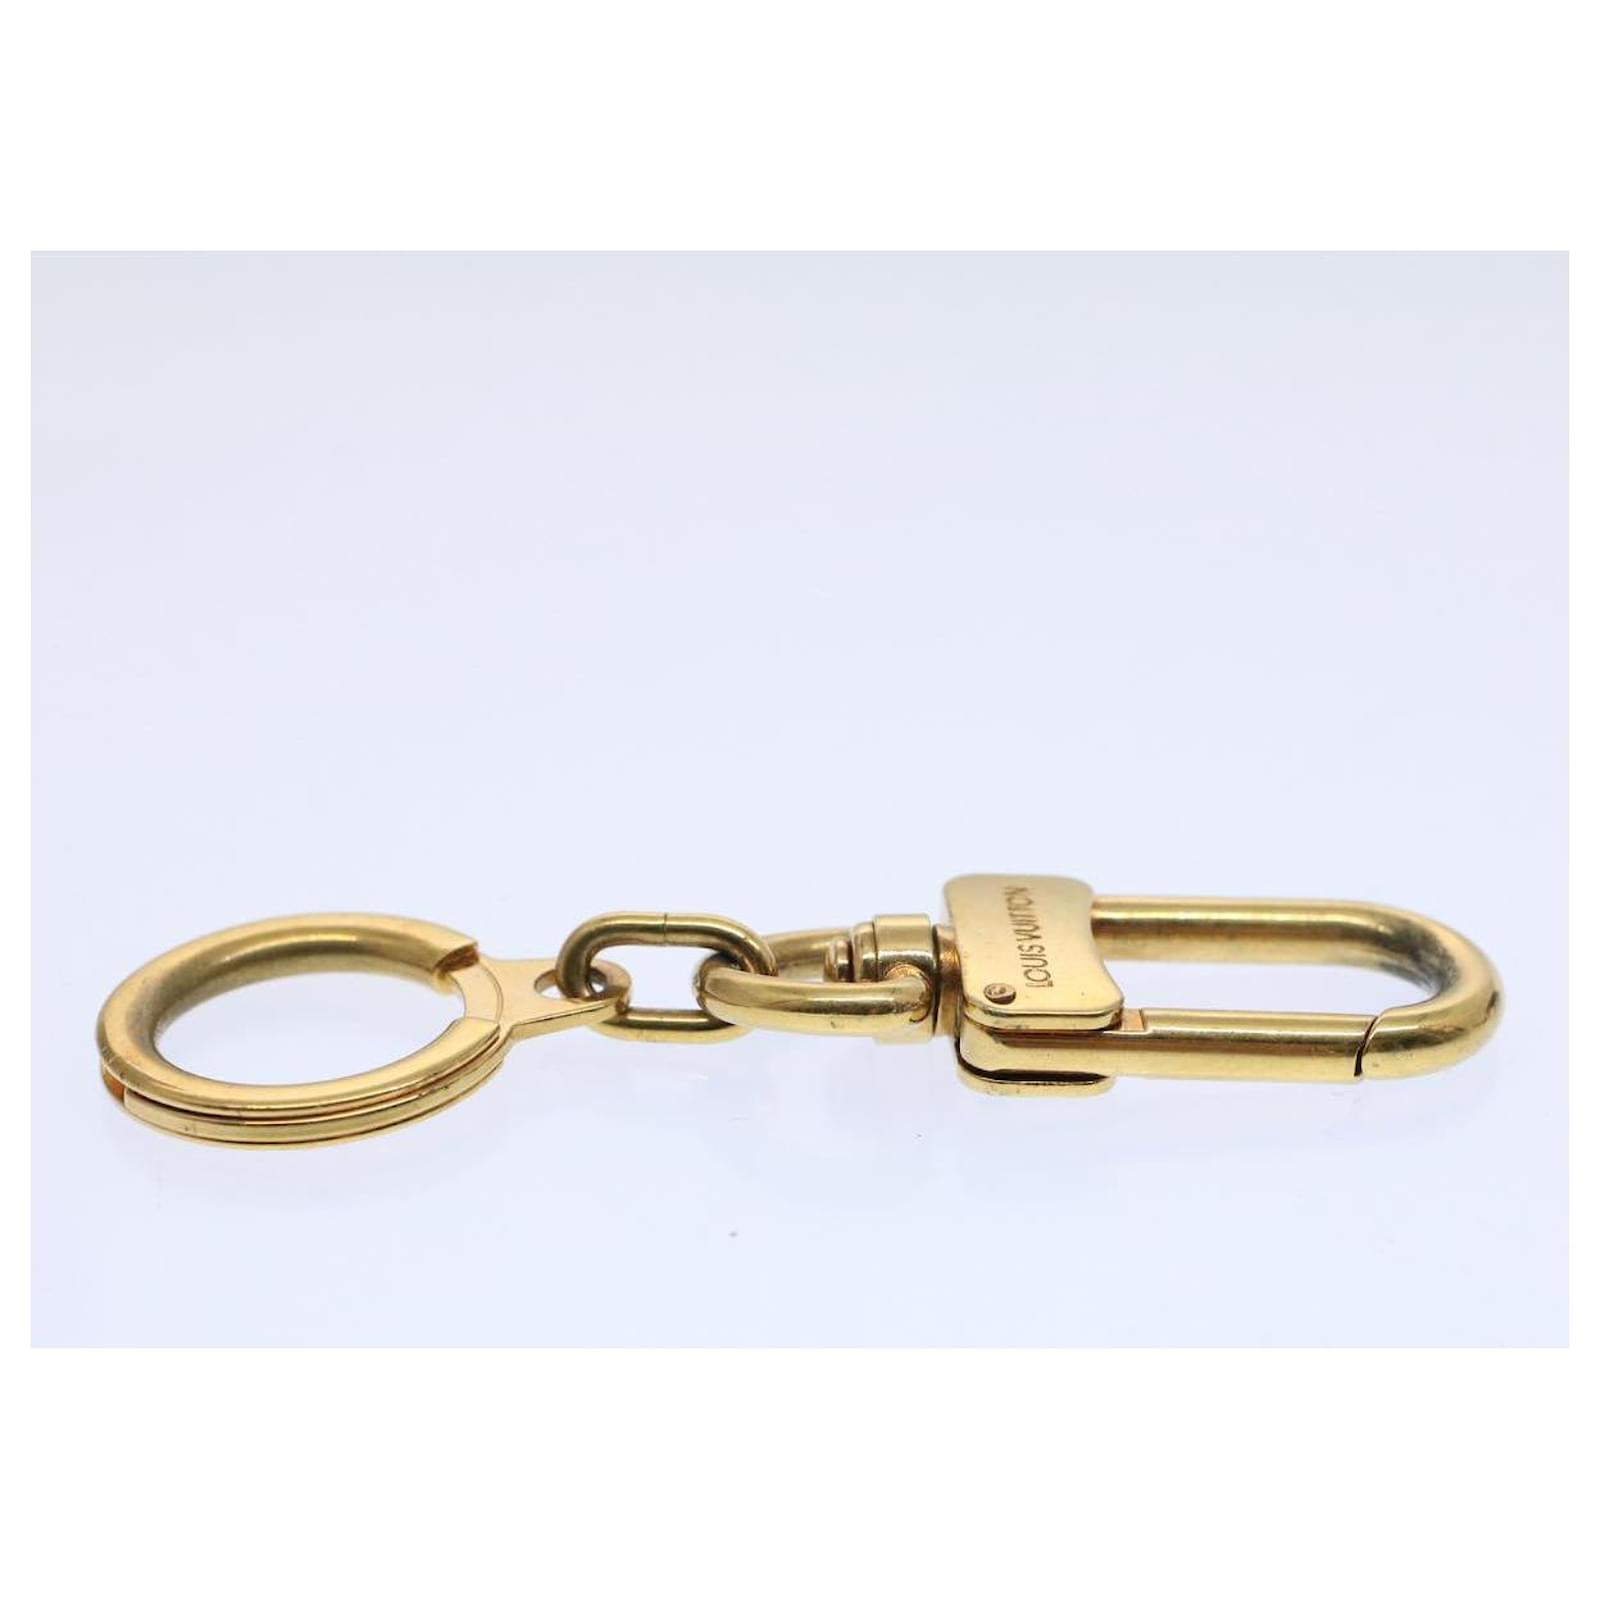 LOUIS VUITTON Goldtone Bolt Key Hold And Bag Extender - The Purse